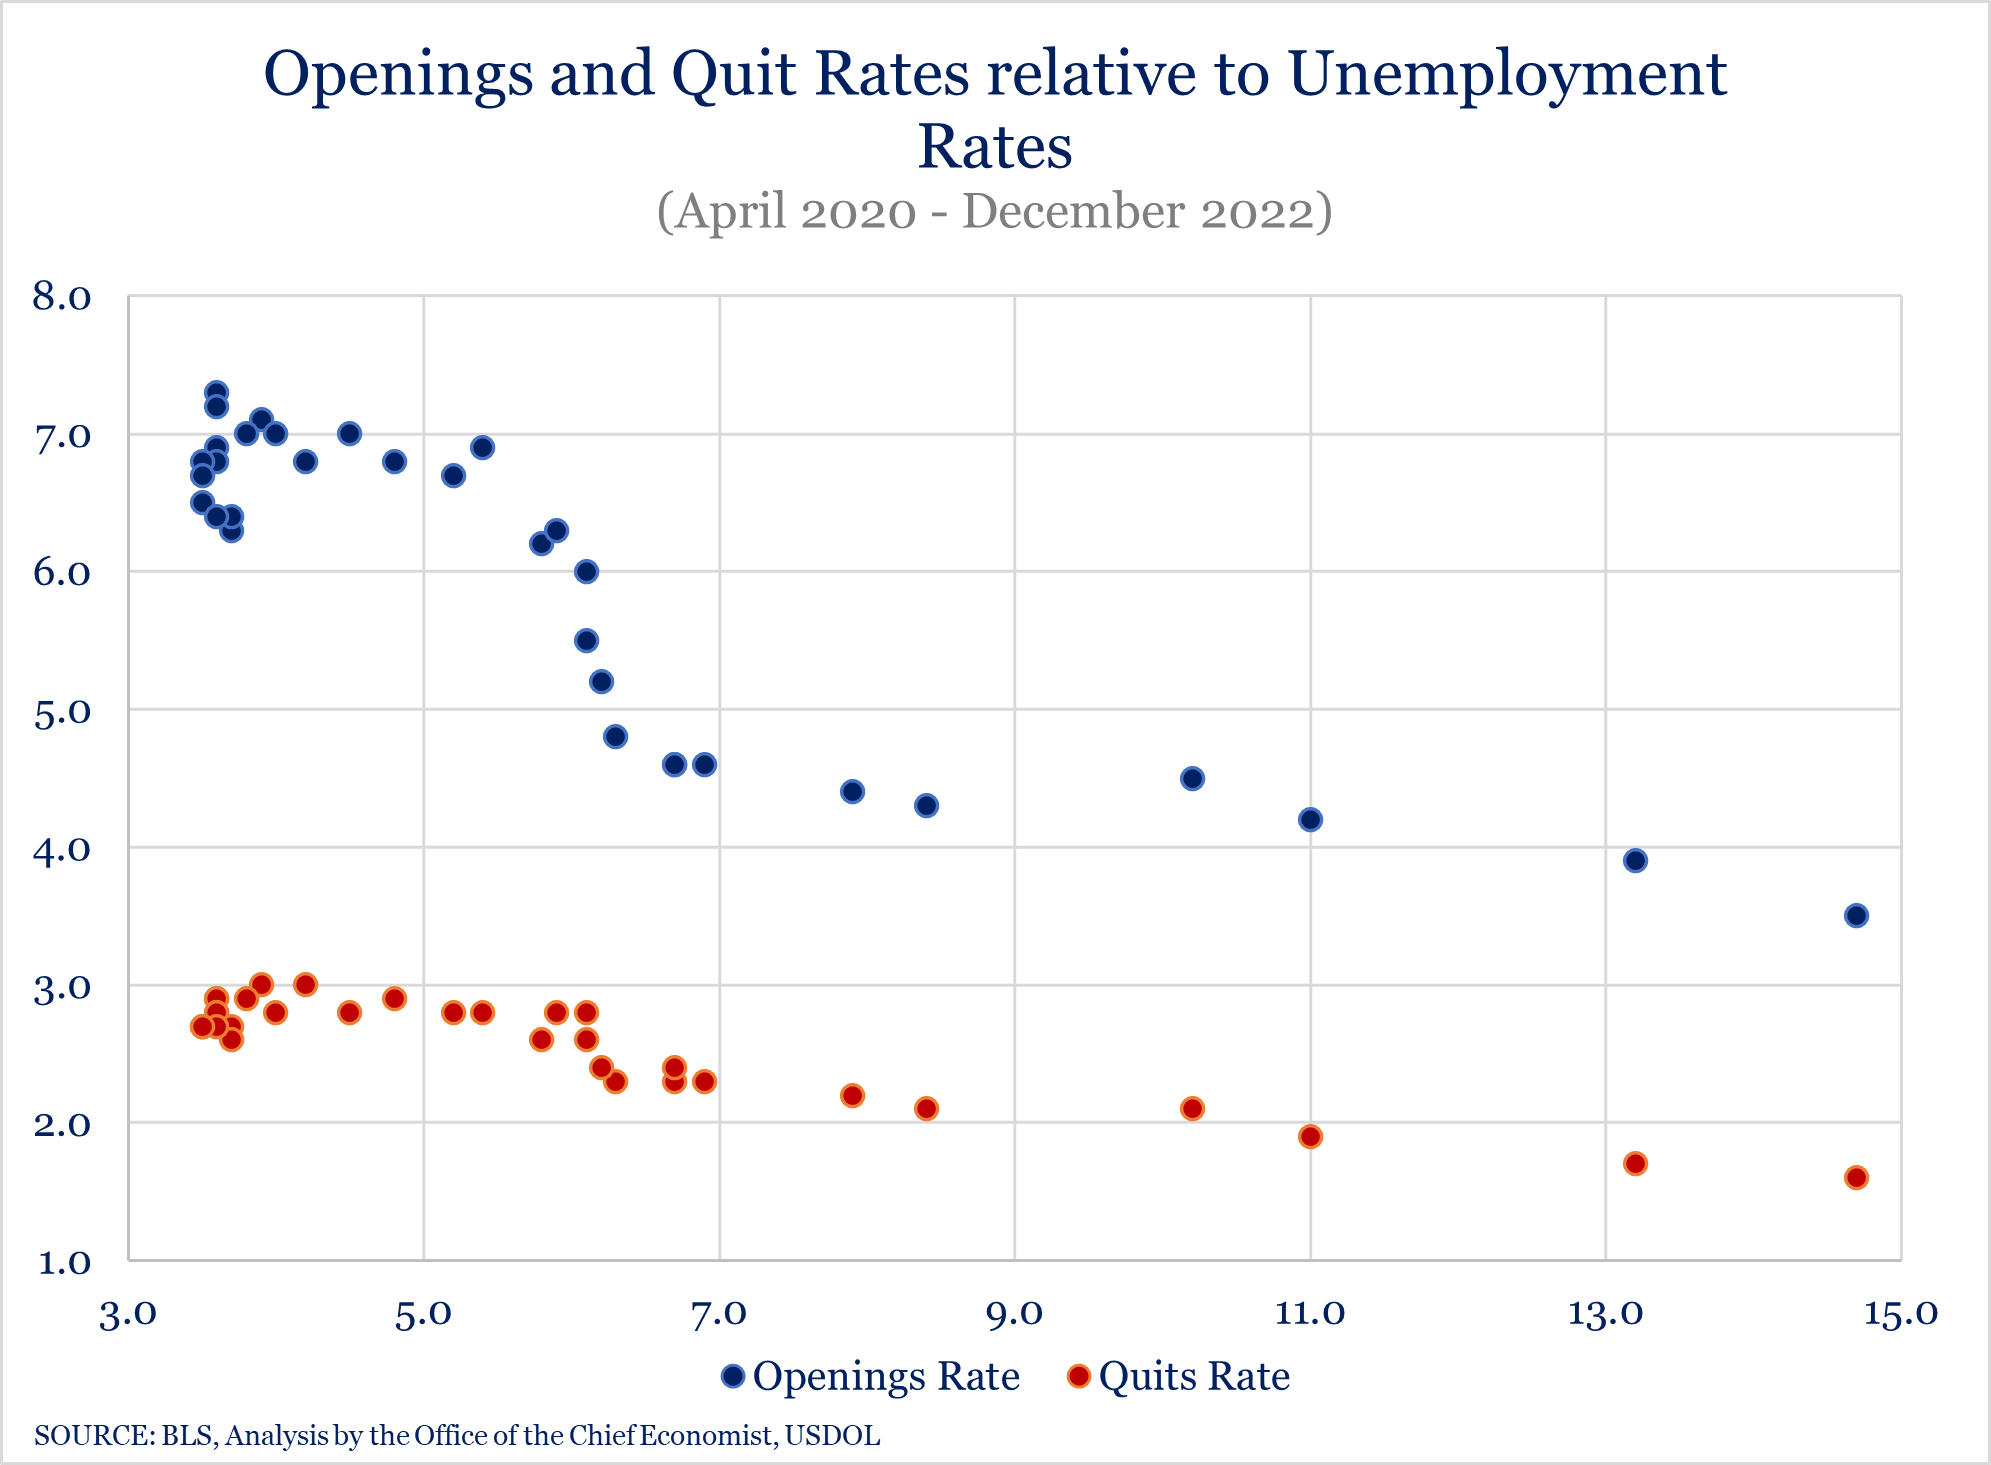 Openings and Quit Rates Relative to Unemployment Rates